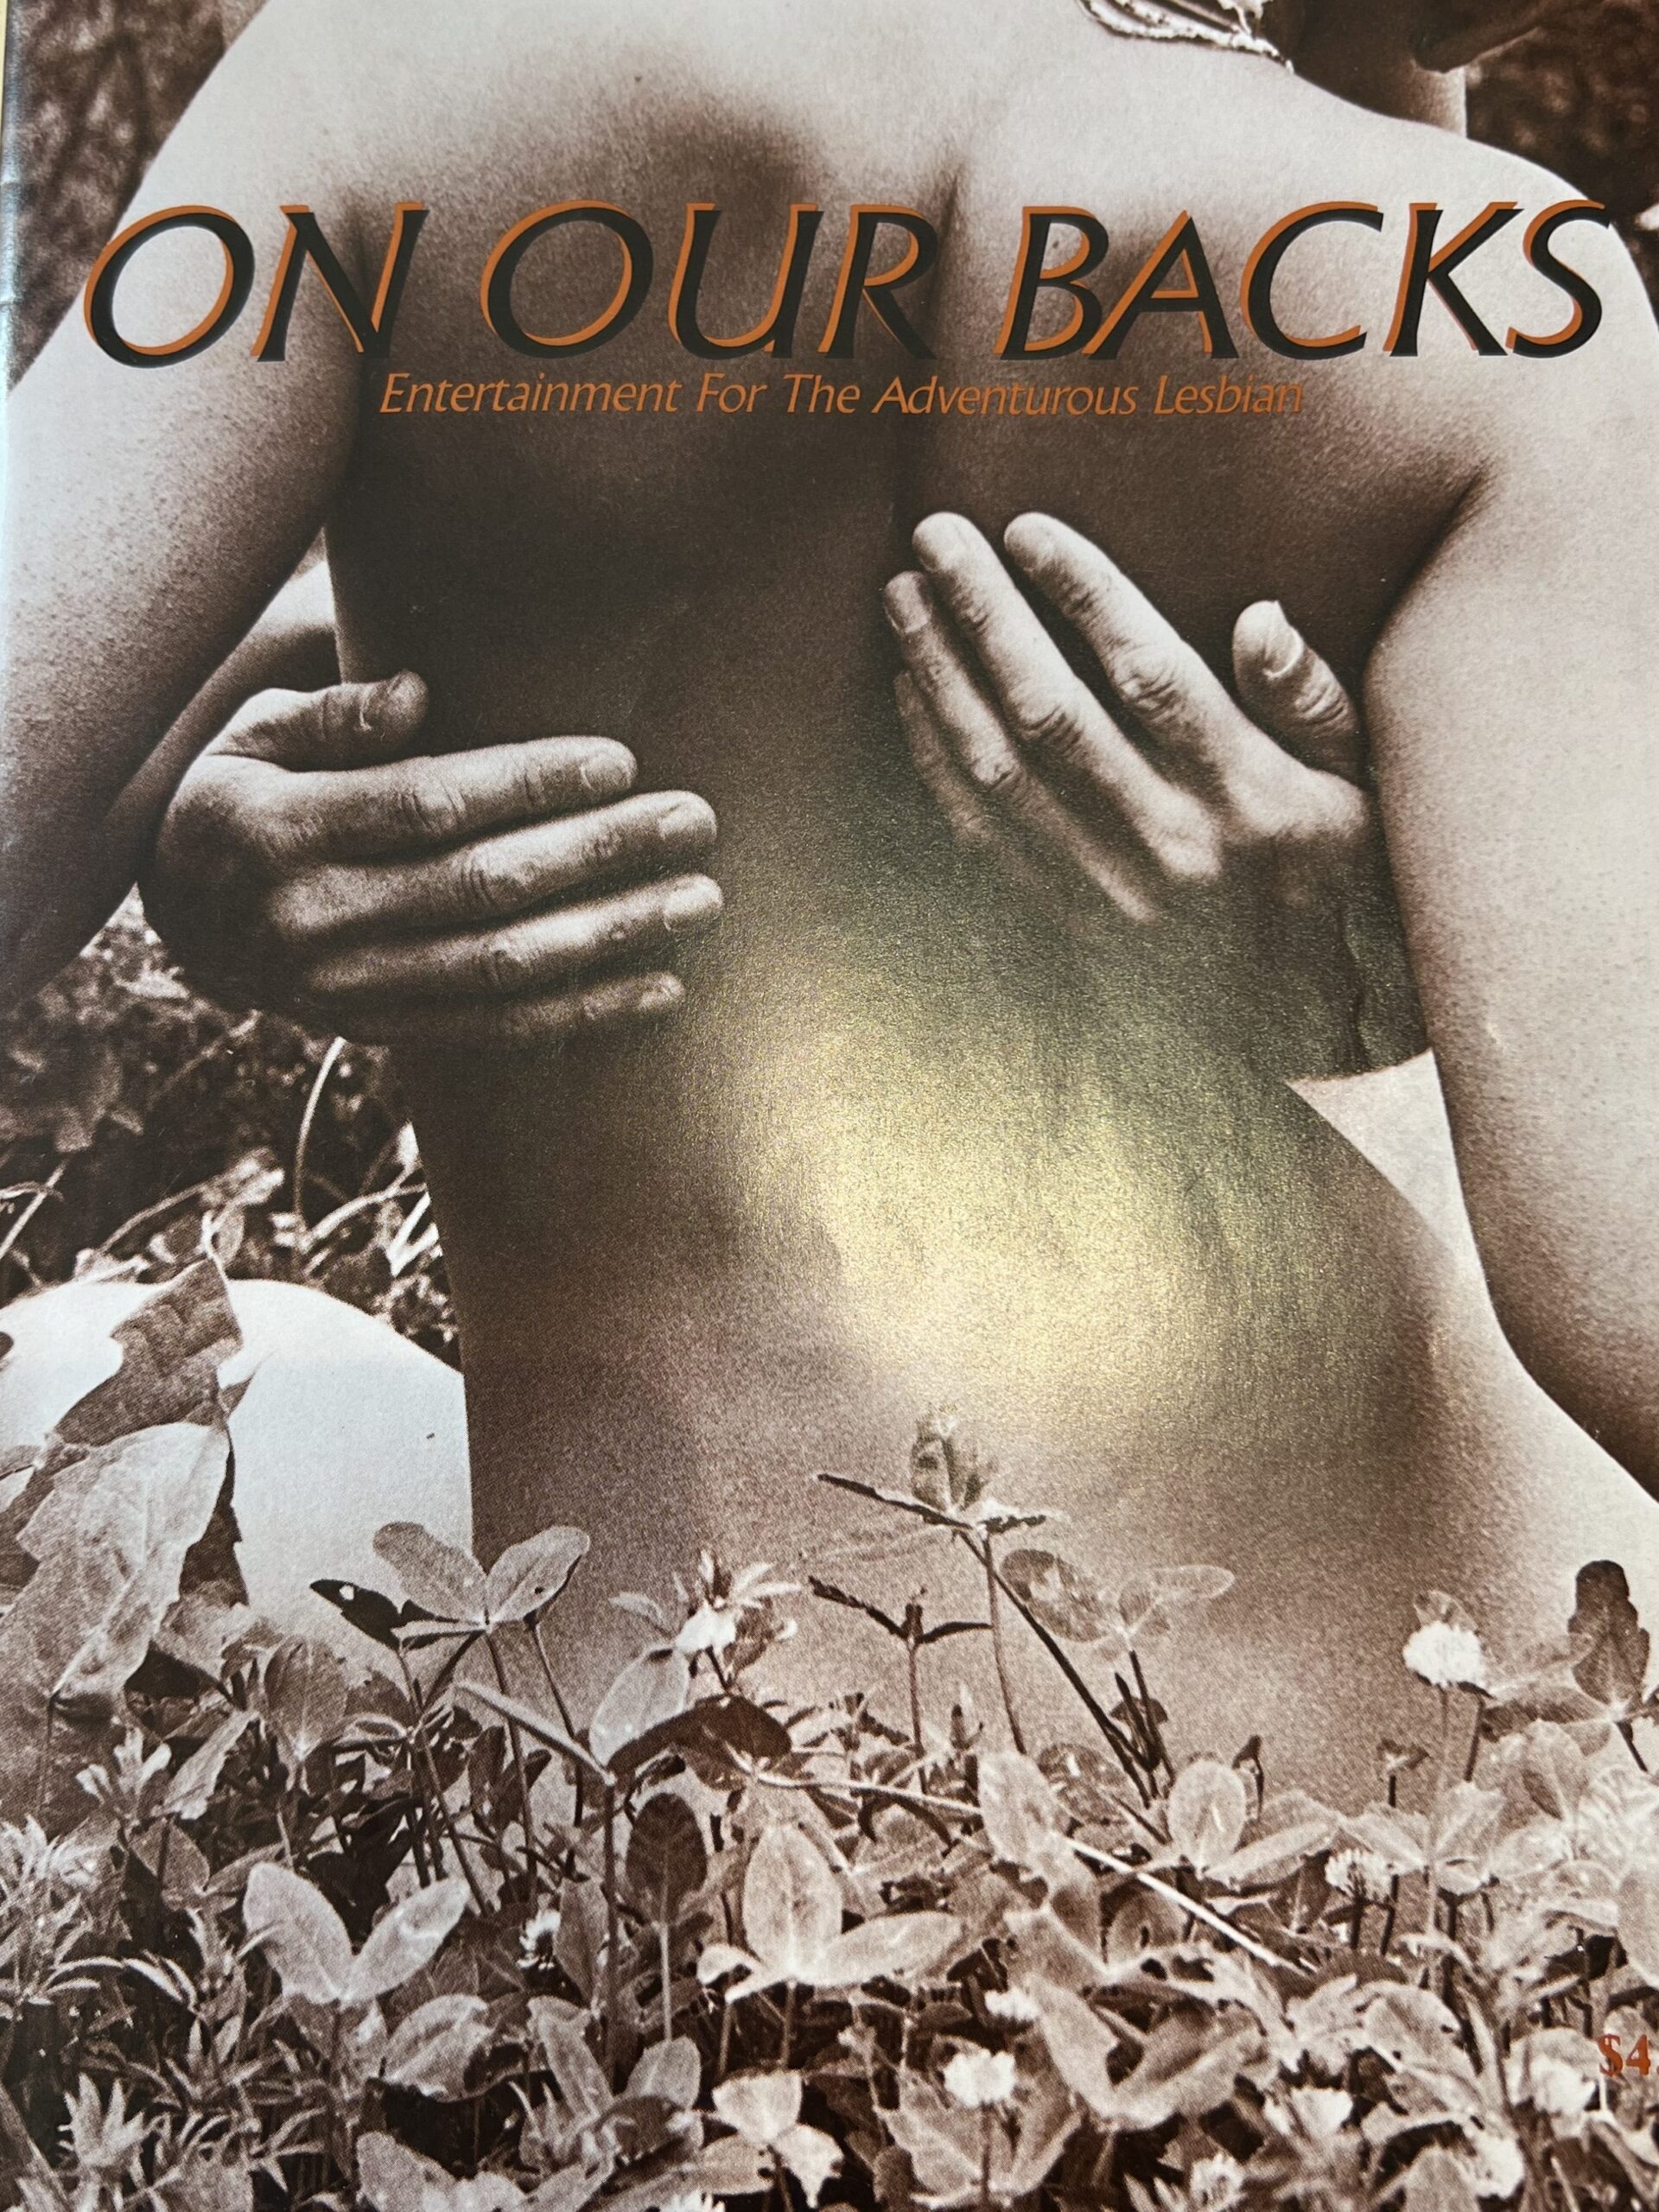 A magazine cover of a bare back with hands wrapped around it amidst leaves. Text reading: "ON OUR BACKS: Entertainment For The Adventurous Lesbian"